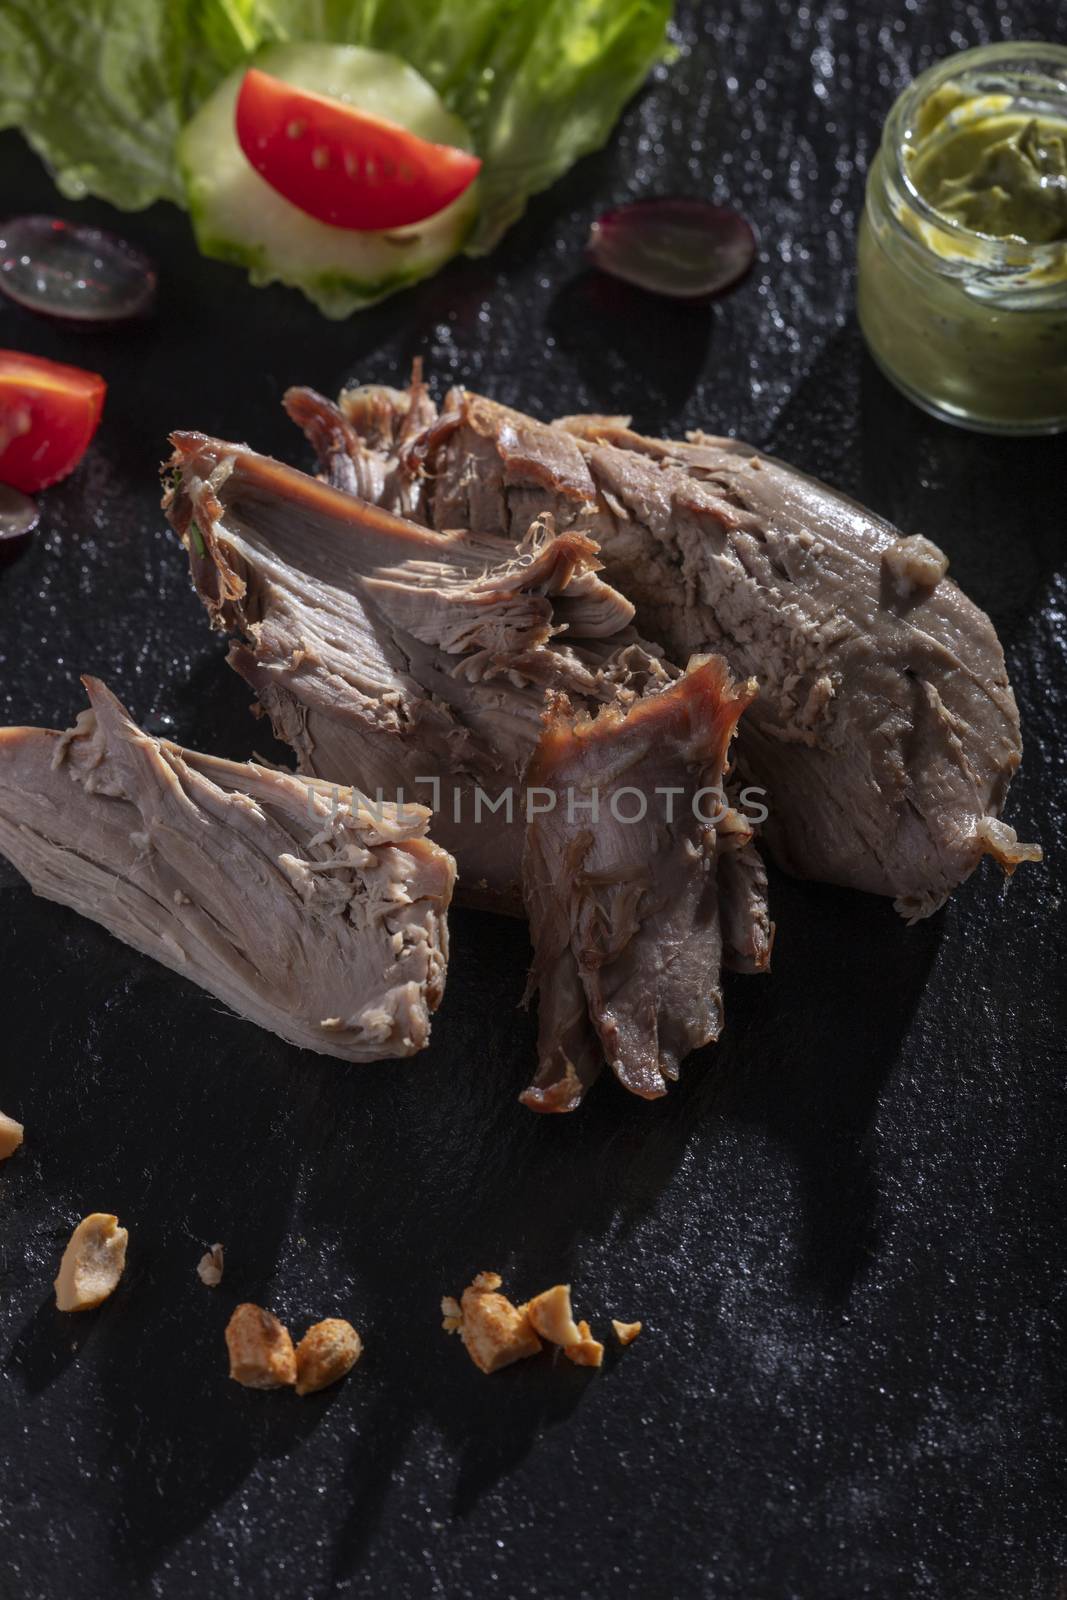 grilled duck on a wooden cutting board